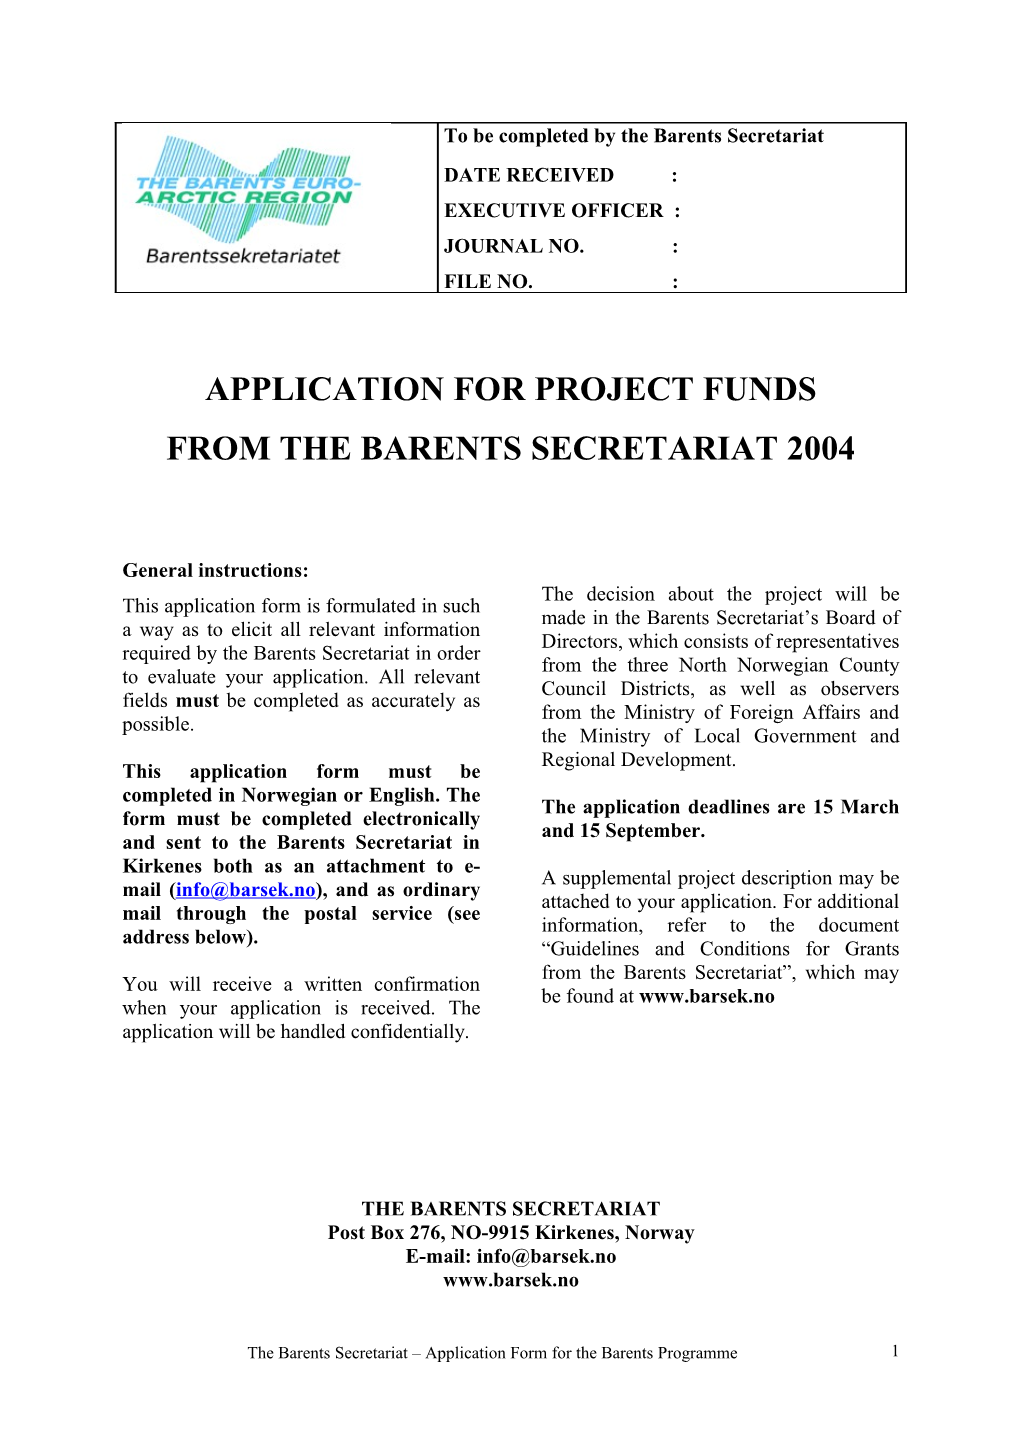 Application for Project Funds